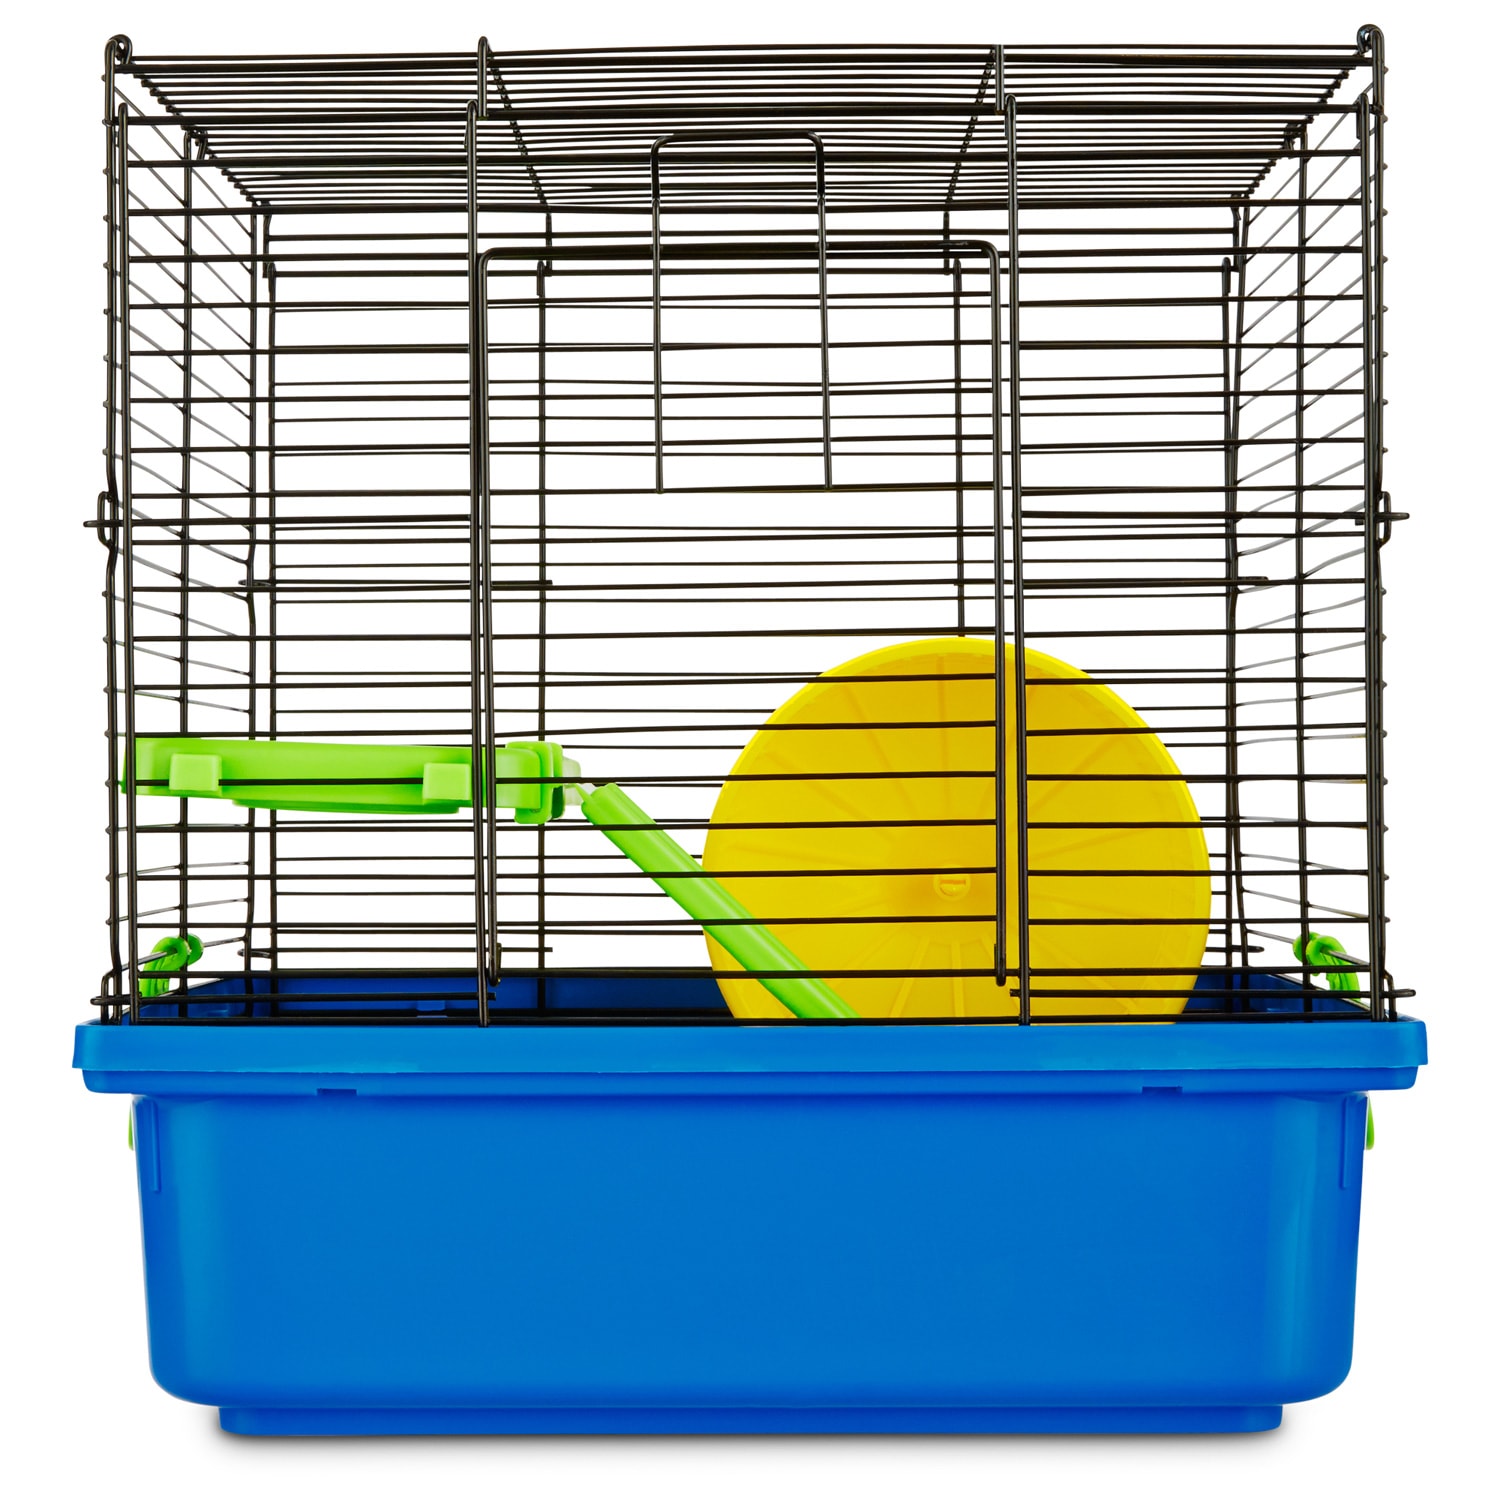 petco hamster cages